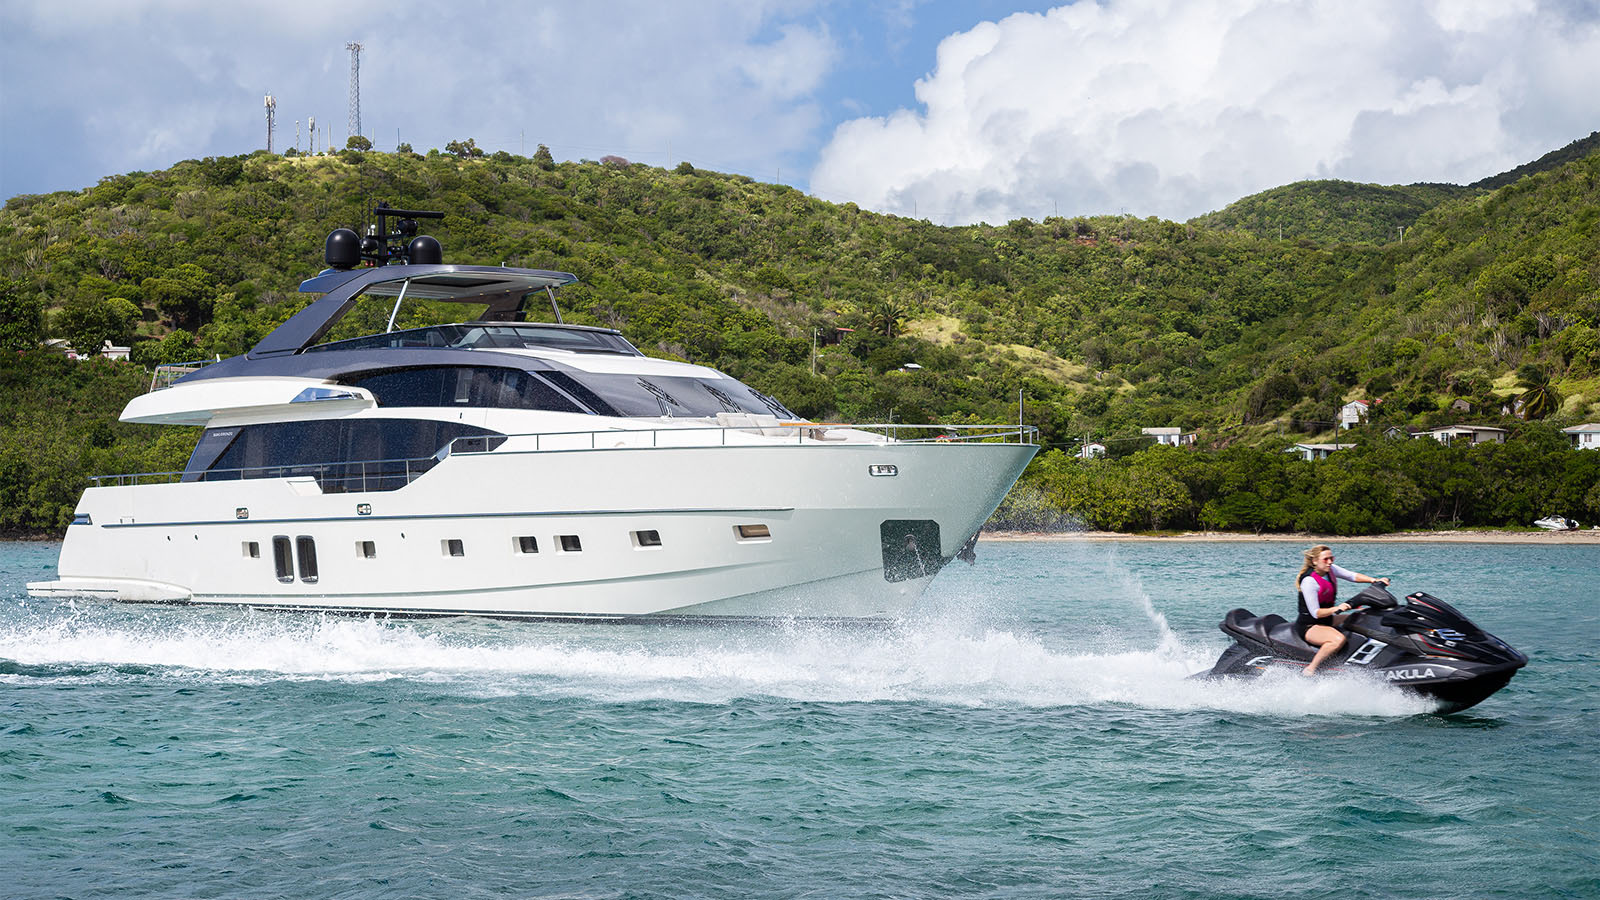 Reduced weekly charter rates with 26m motor yacht AKULA in the Bahamas